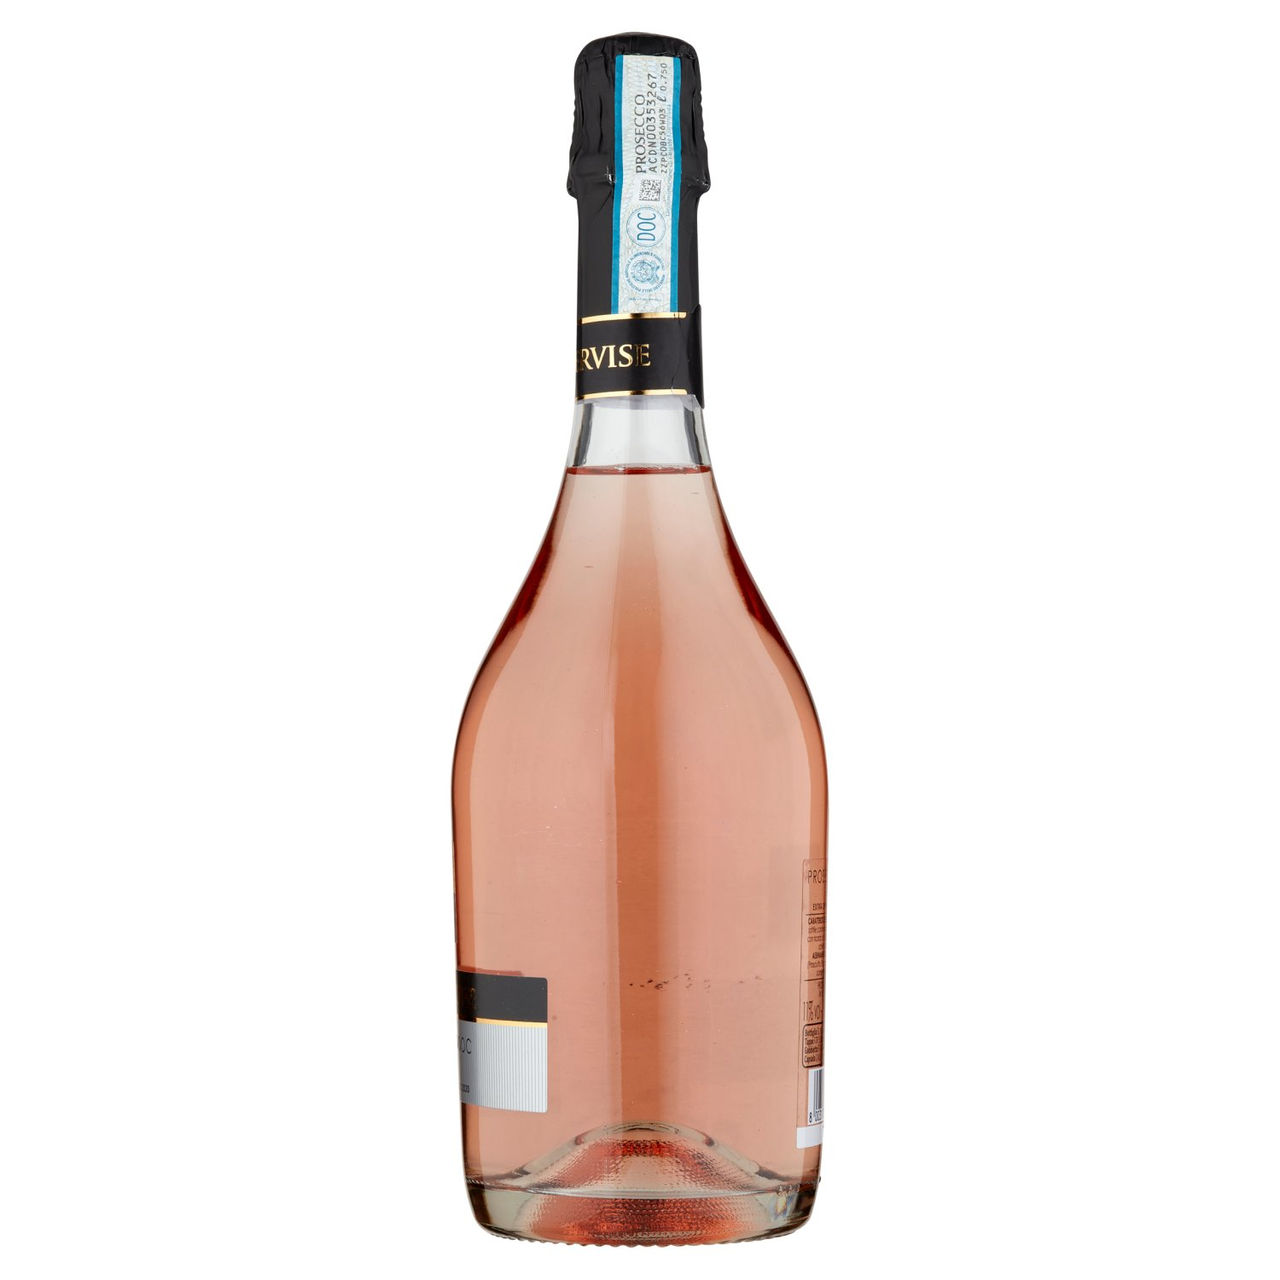 DAME TERVISE Prosecco DOC Rosé Extra Dry Millesimato 75 cl